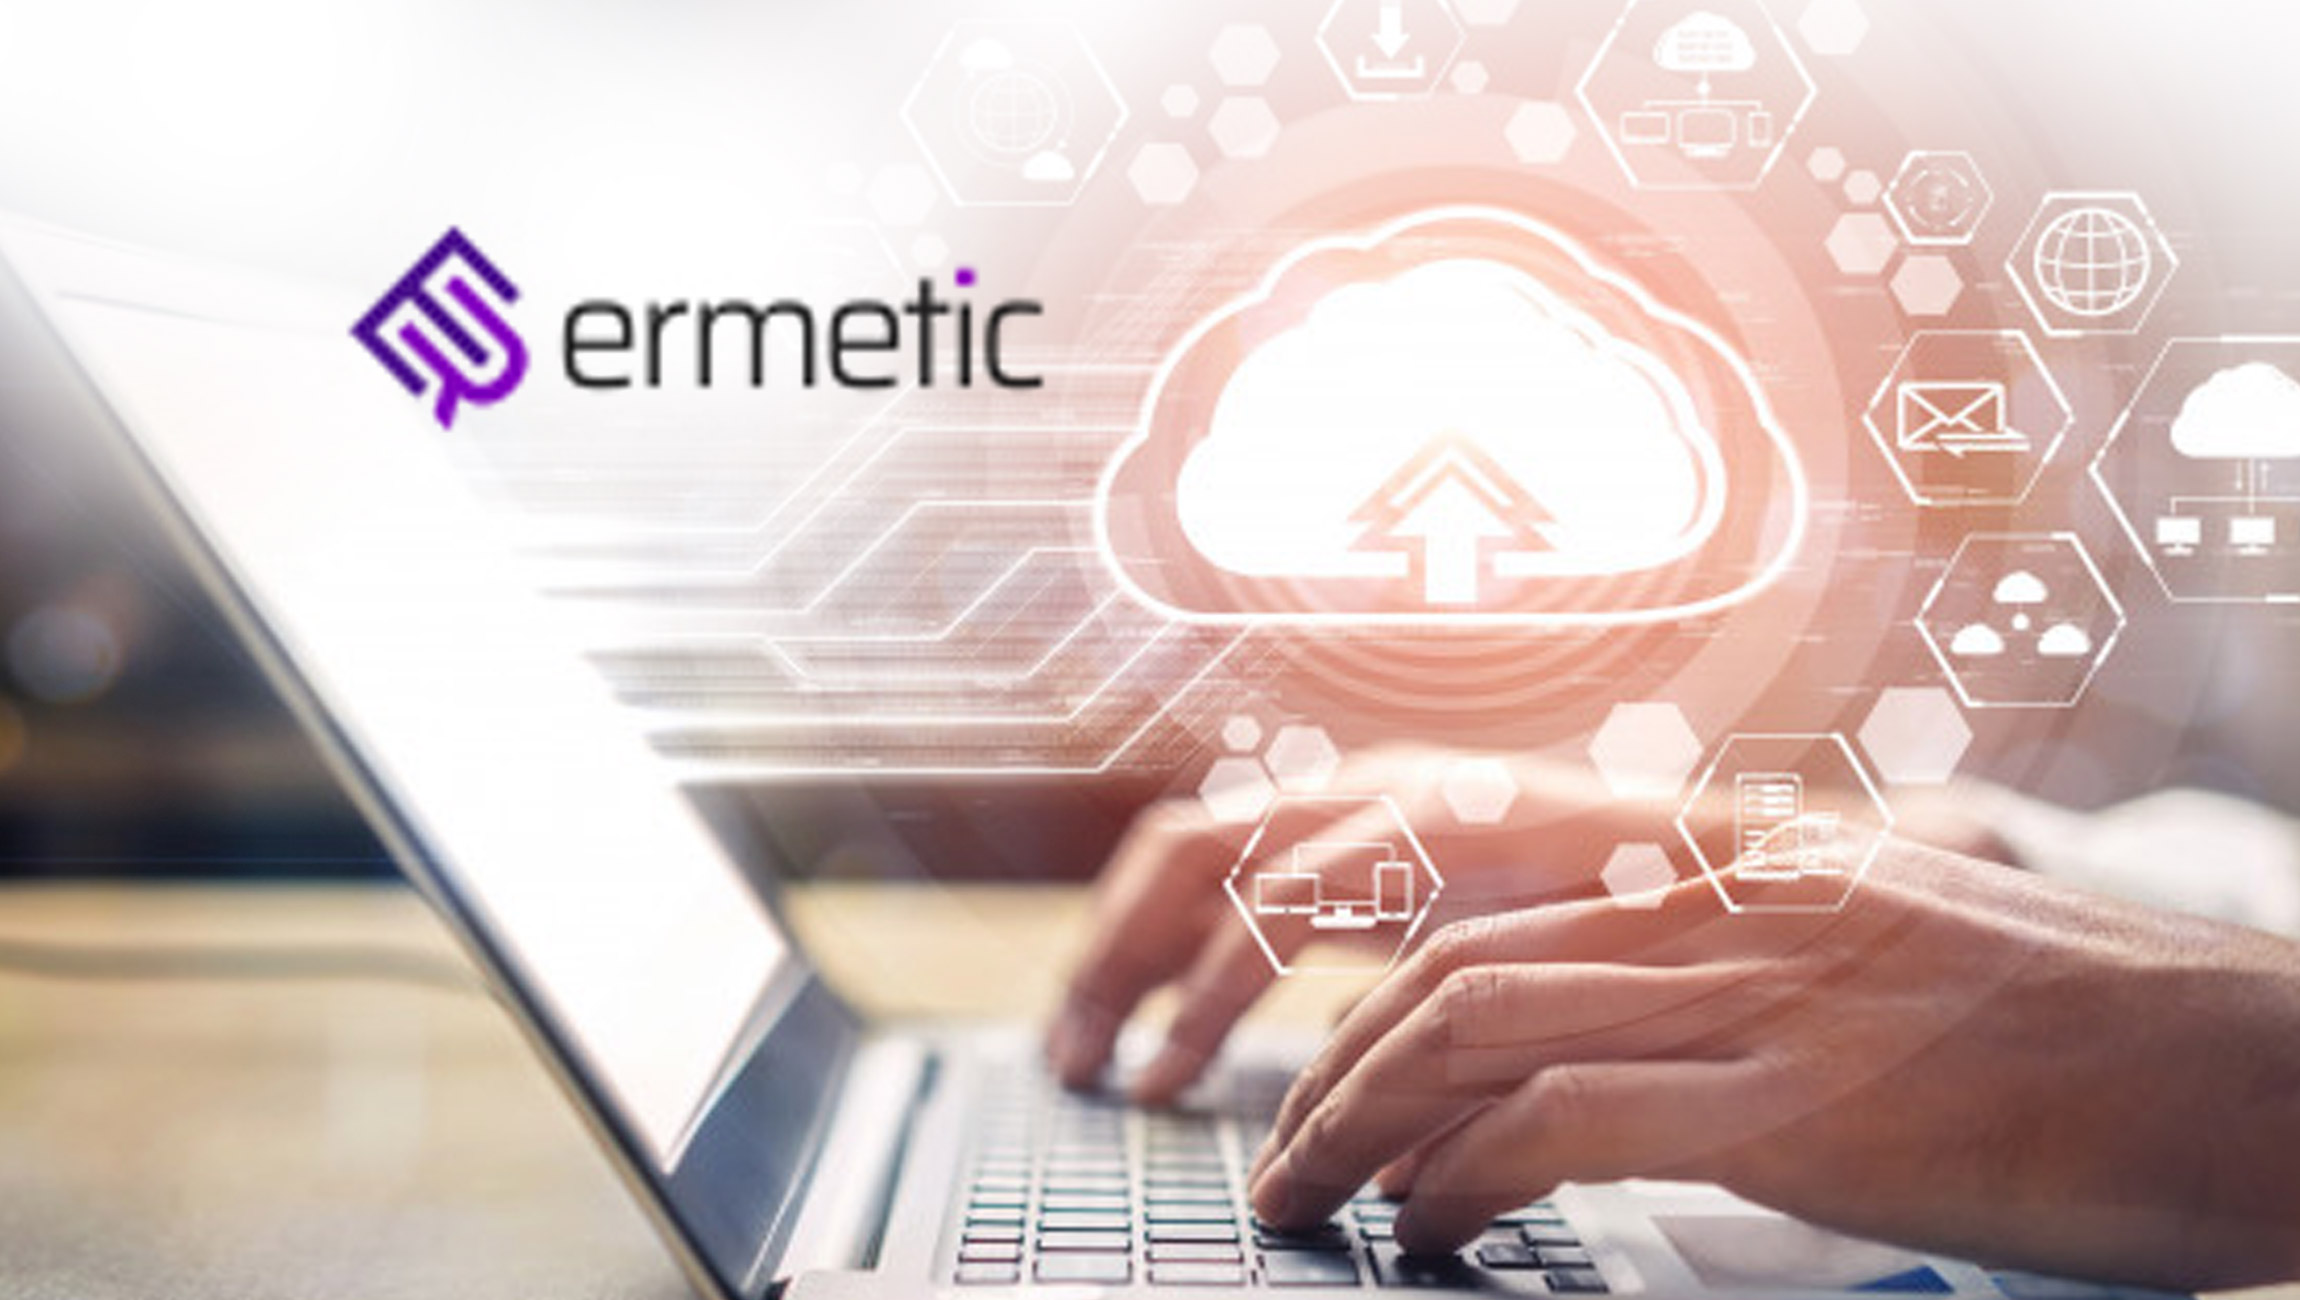 Ermetic Launches Synergia Global Channel Partner Program